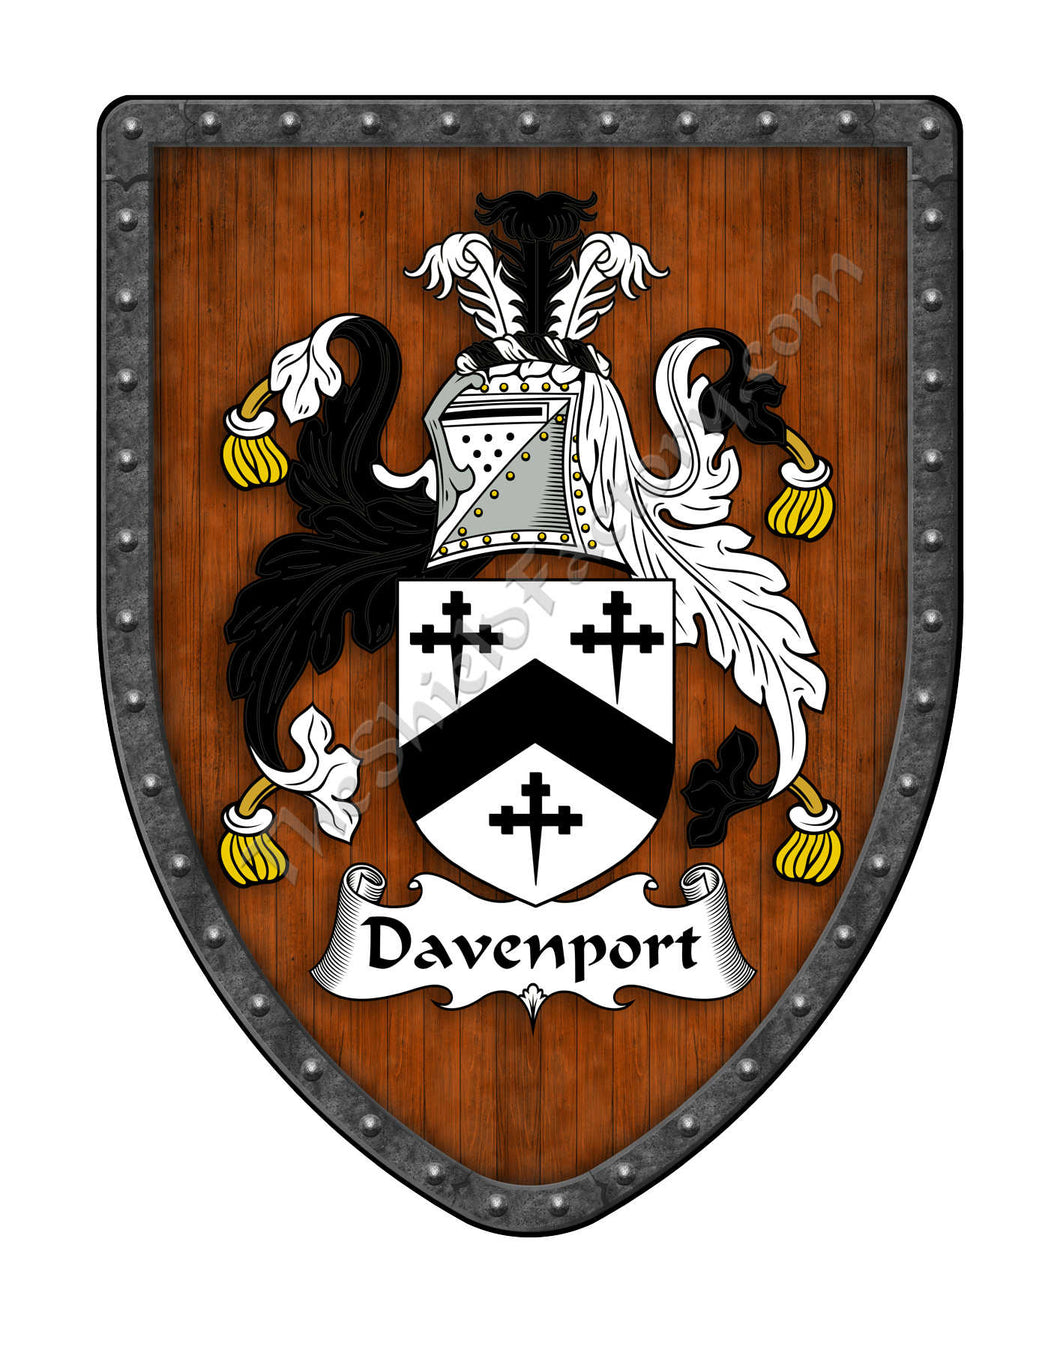 Davenport Coat of Arms Shield Family Crest